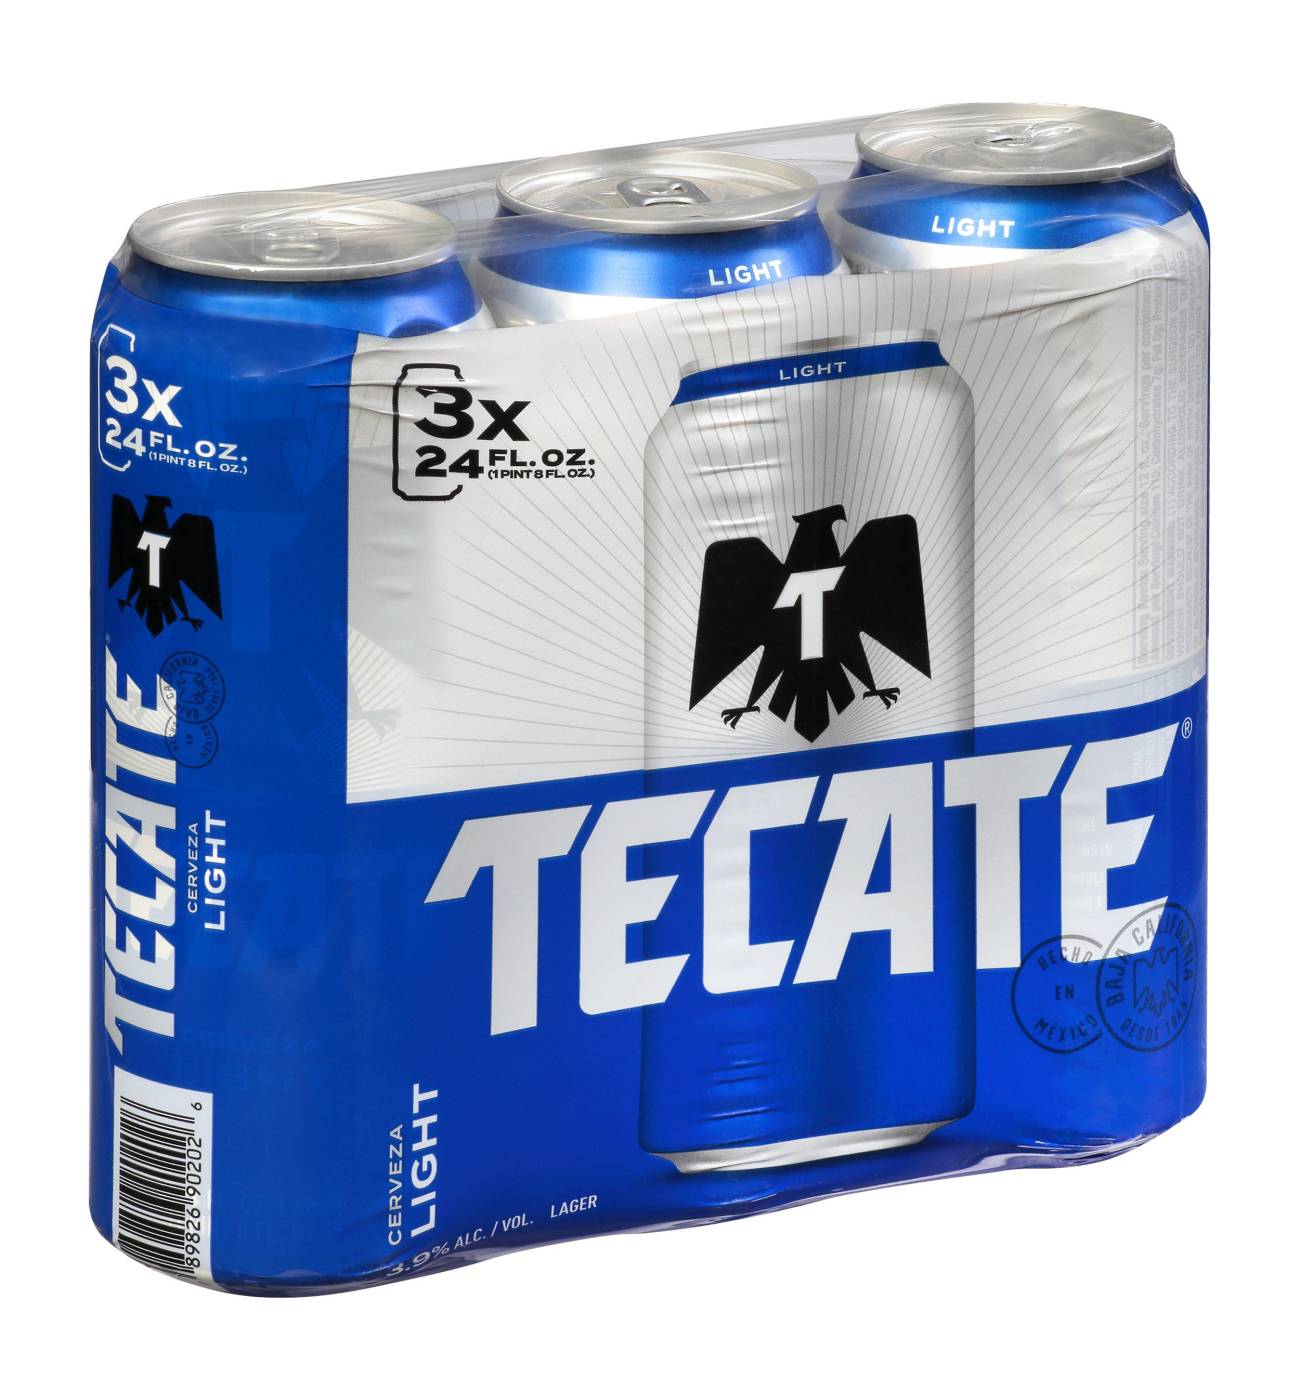 Tecate Light Beer 24 oz Cans; image 1 of 2